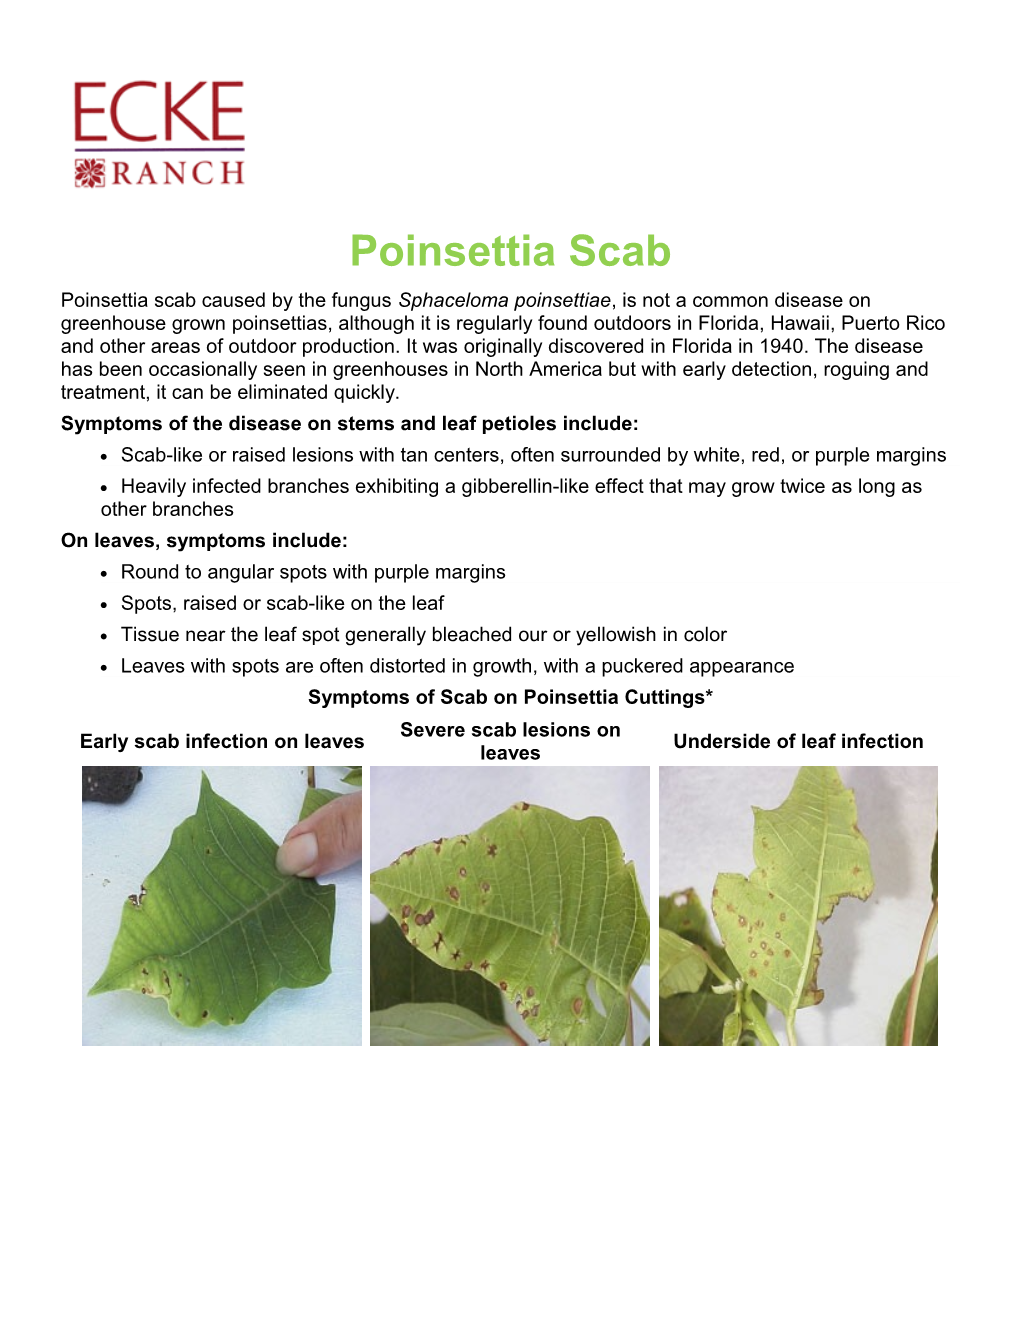 Symptoms of the Disease on Stems and Leaf Petioles Include